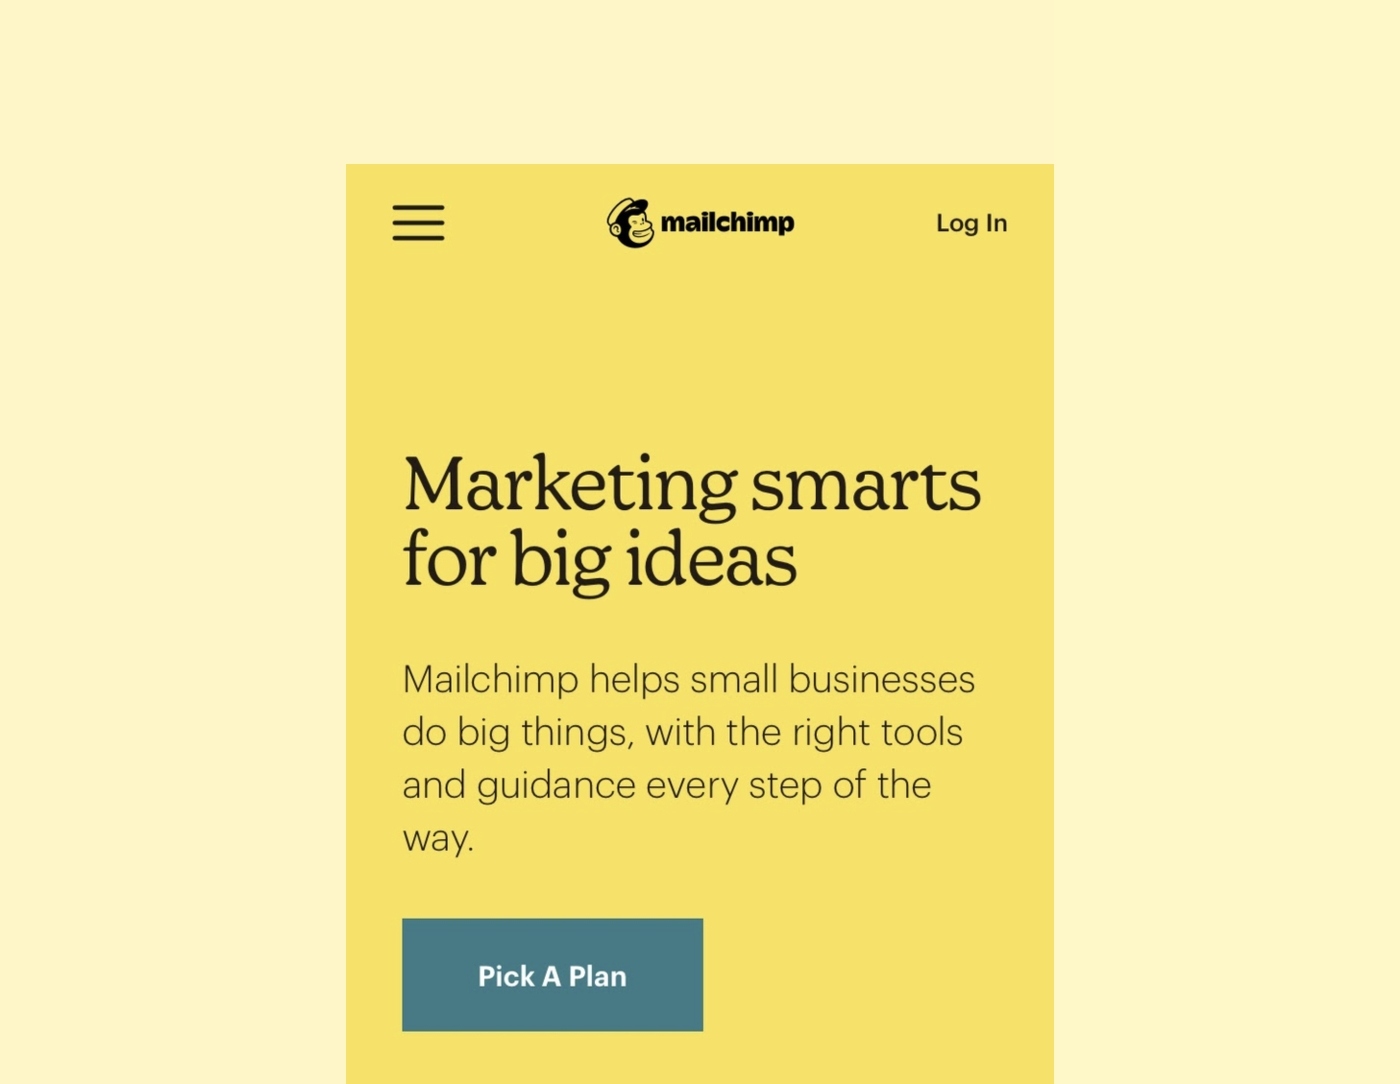 MailChimp relies on size, color contrast and whitespace to direct user attention towards the “Pick A Plan” call to action button. 